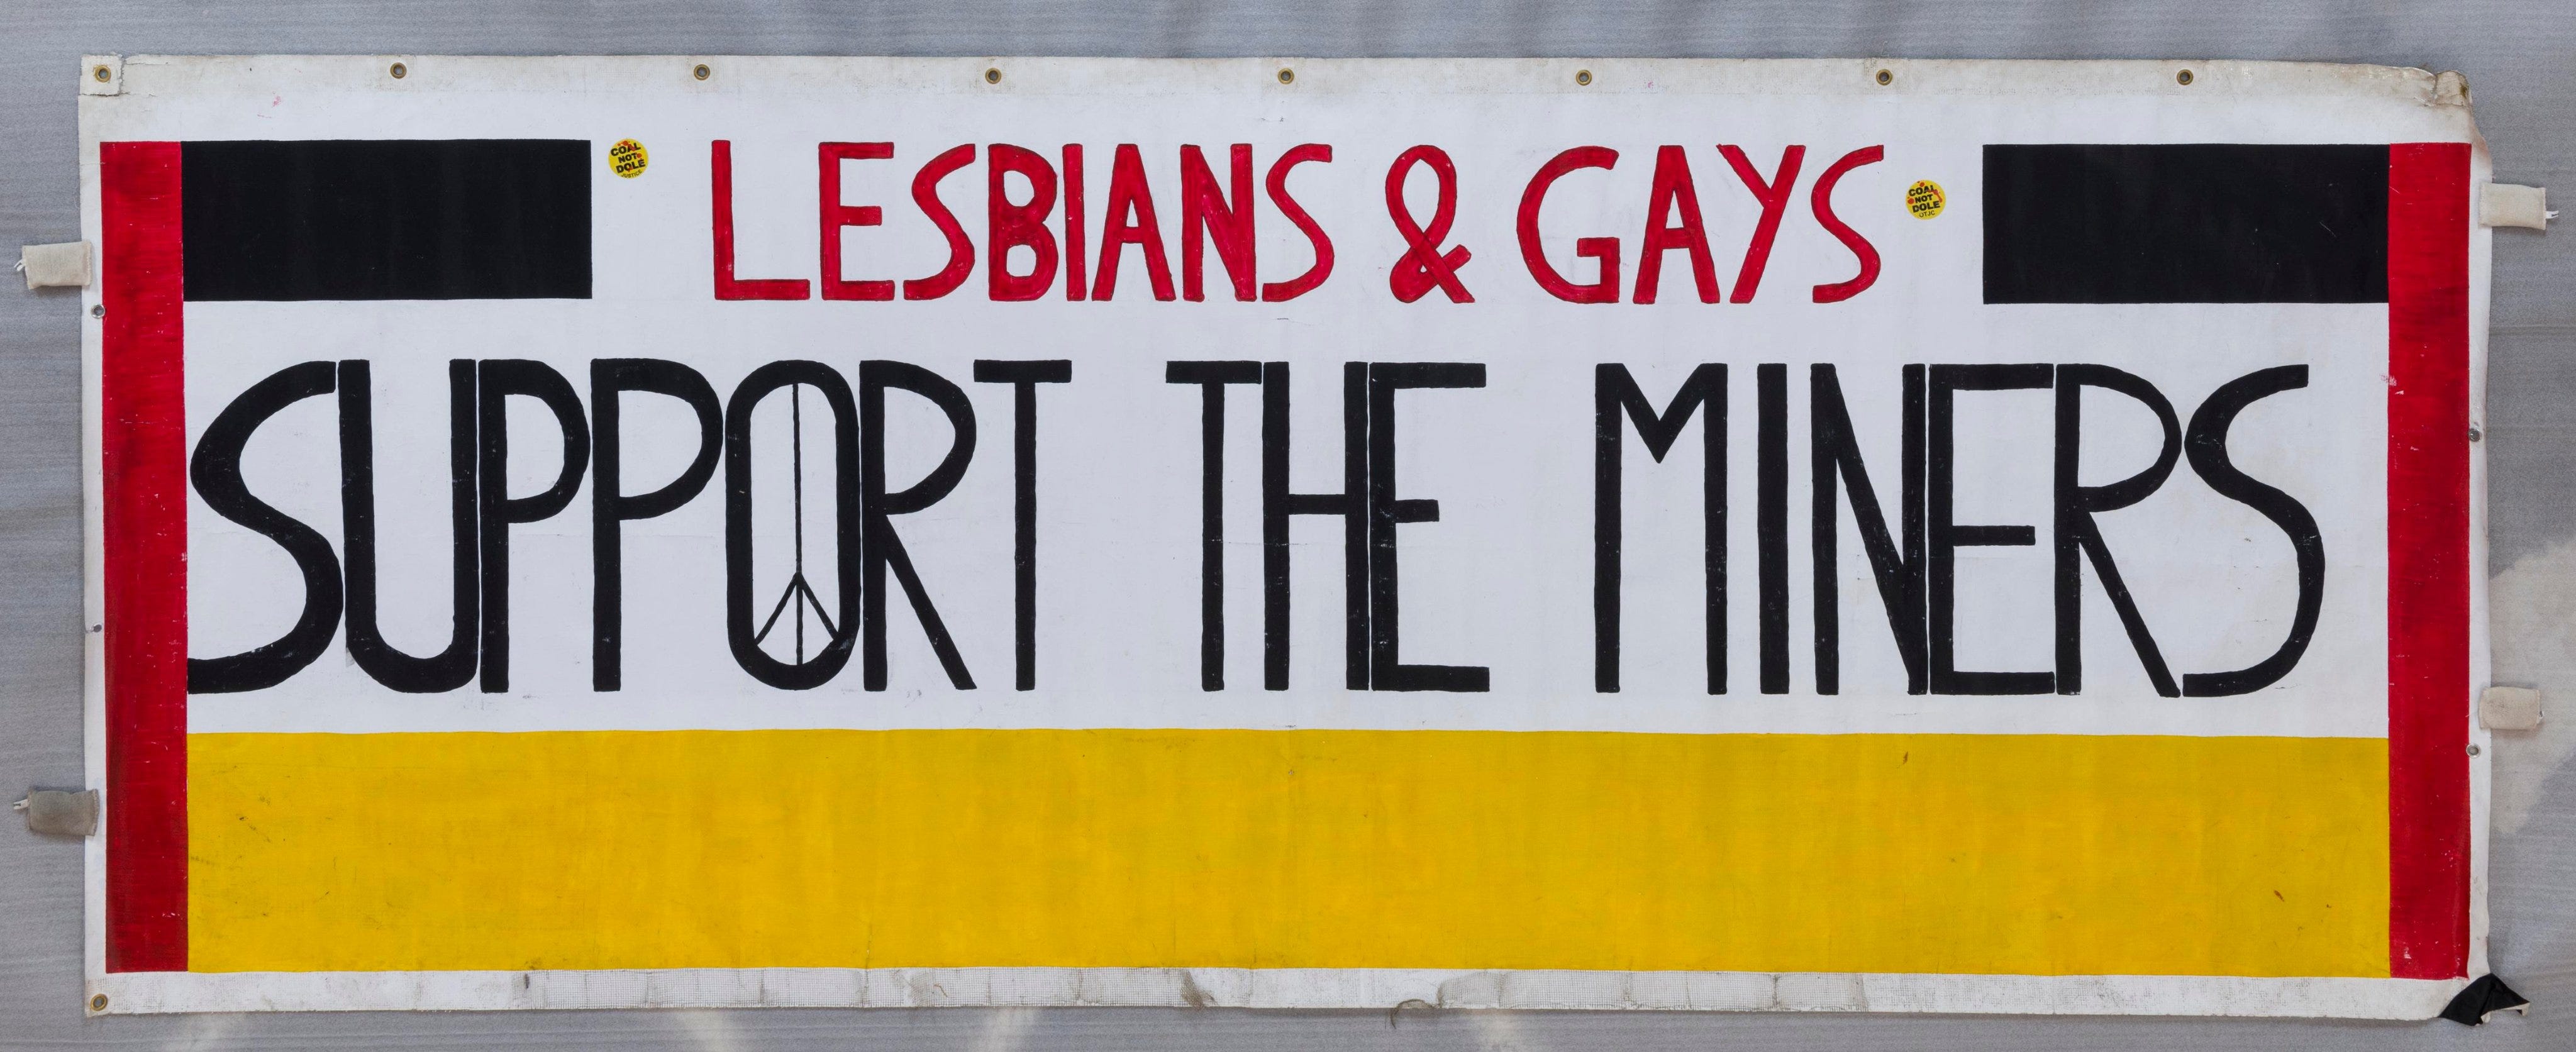 Lesbians and Gays Support the miners banner